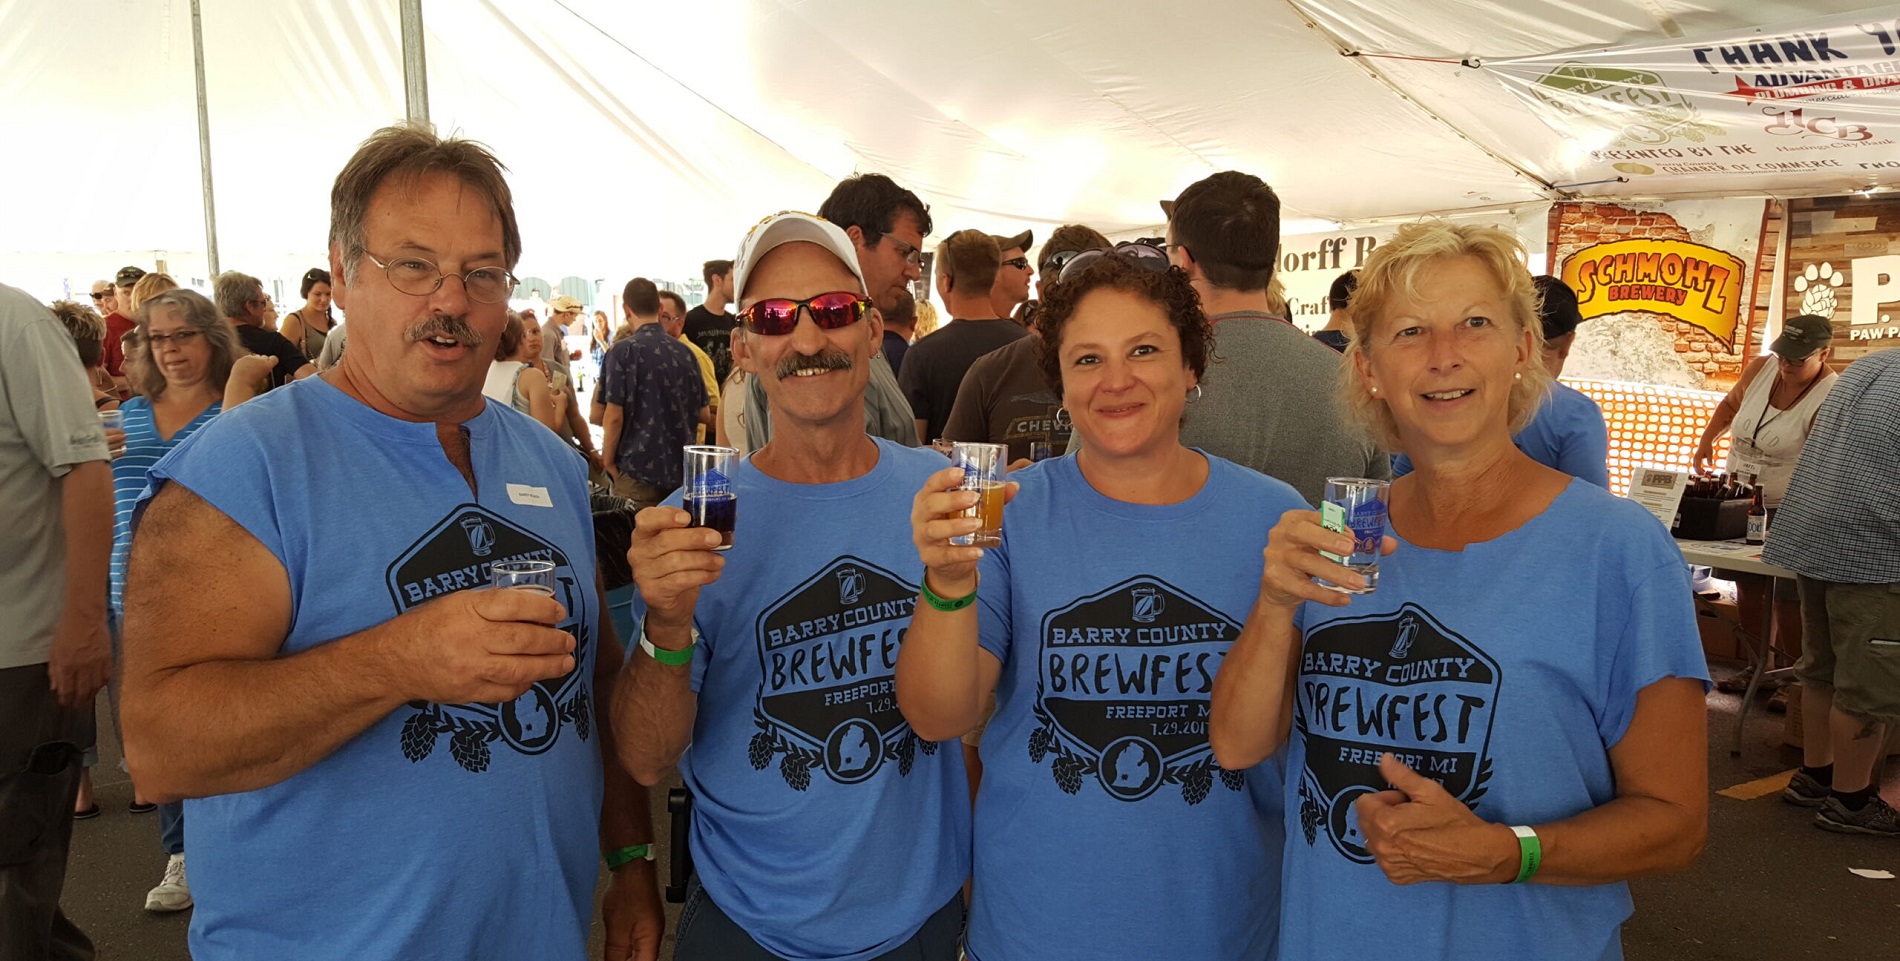 Barry County BrewFest